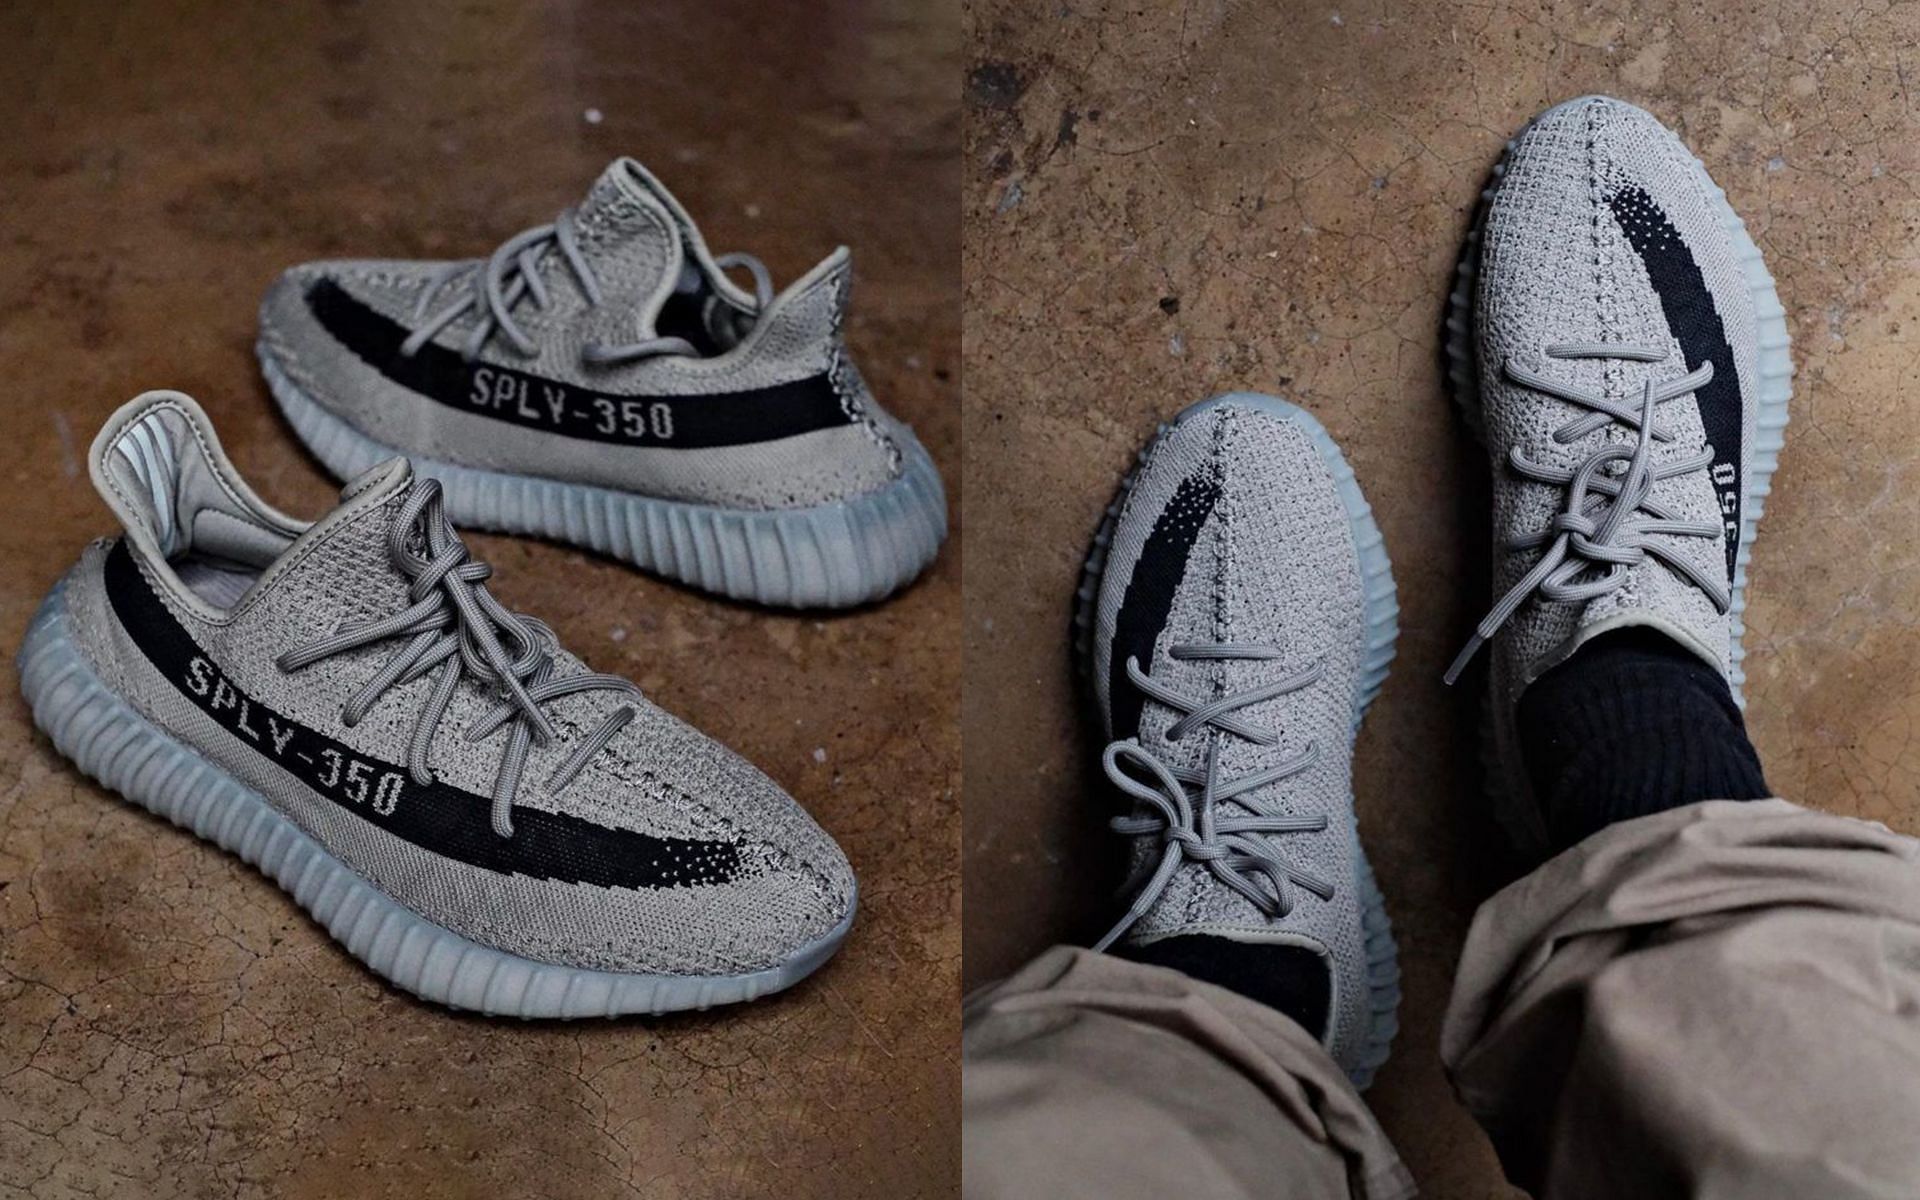 to buy Adidas Yeezy BOOST 350 V2 Granite shoes? Price and more details explored